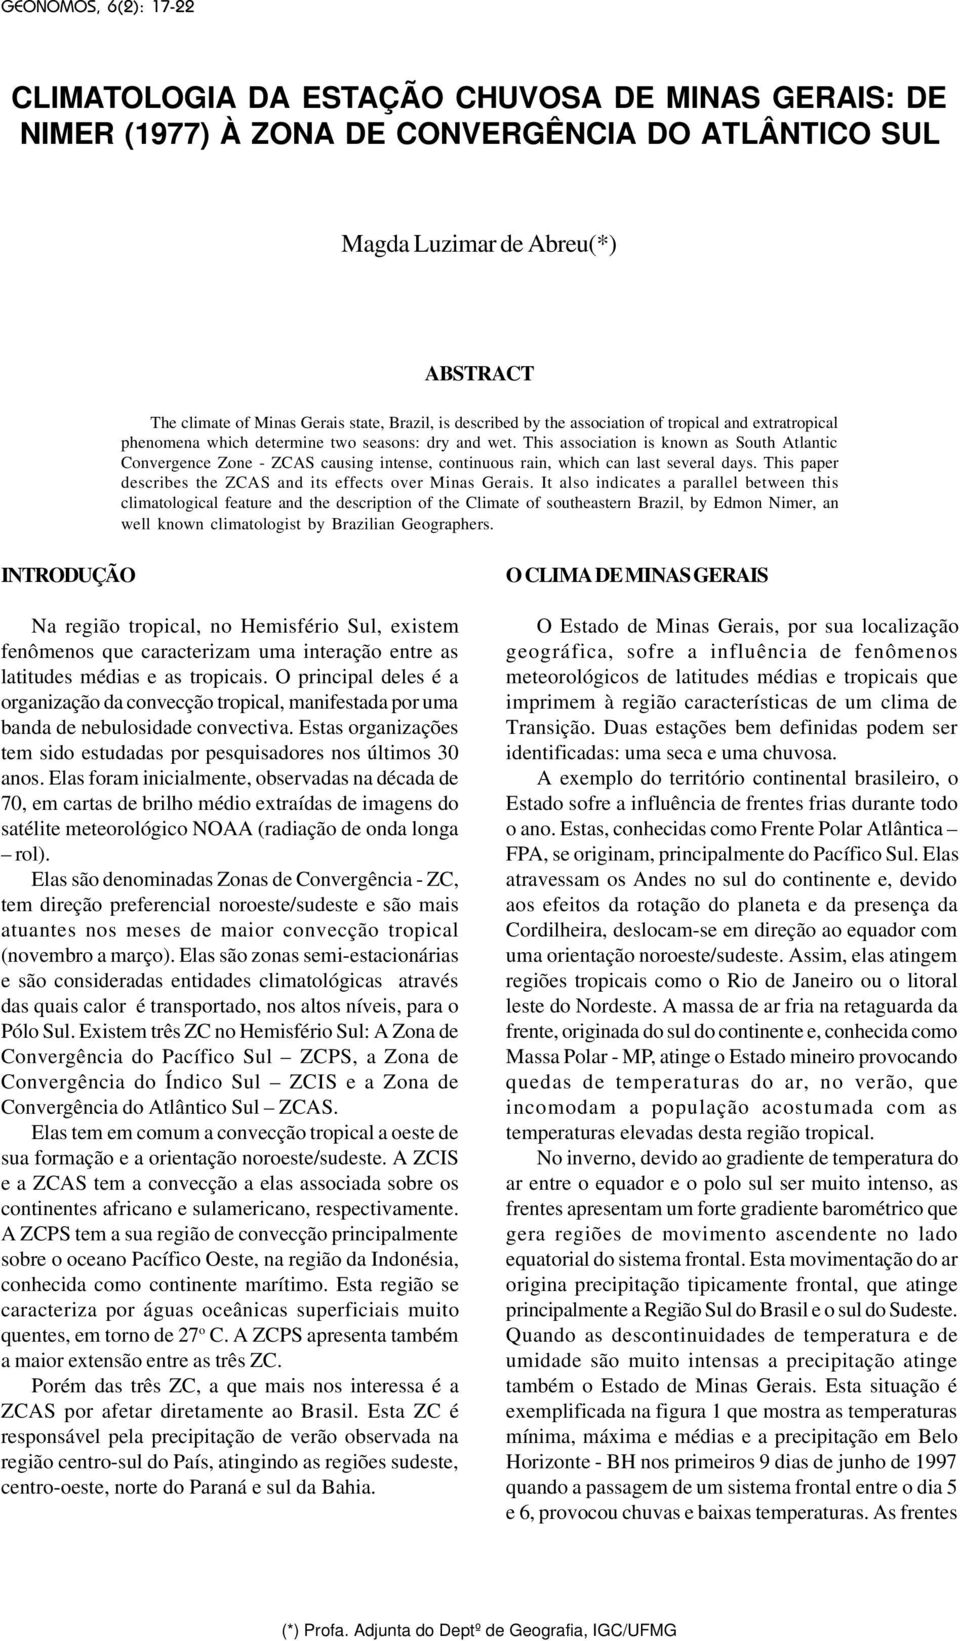 This association is known as South Atlantic Convergence Zone - ZCAS causing intense, continuous rain, which can last several days. This paper describes the ZCAS and its effects over Minas Gerais.